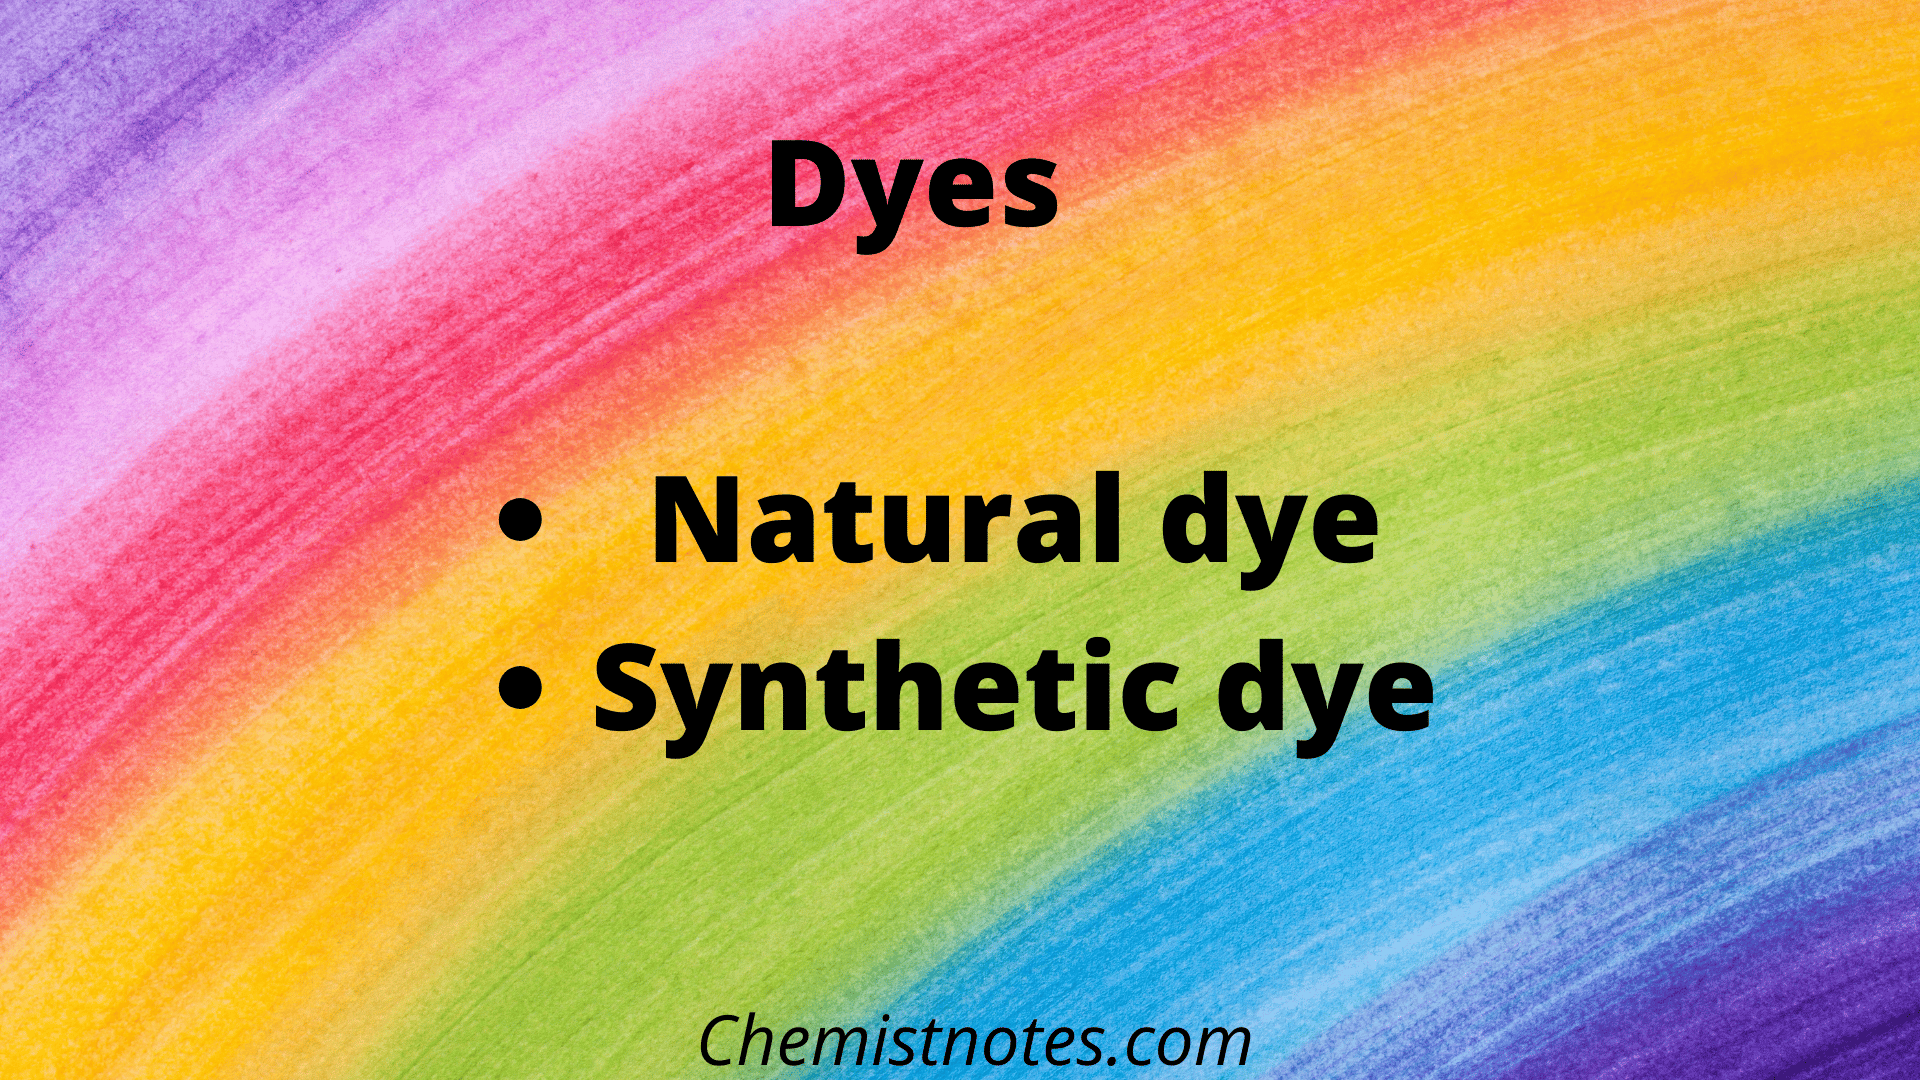 dyes-definition-classification-examples-chemistry-notes